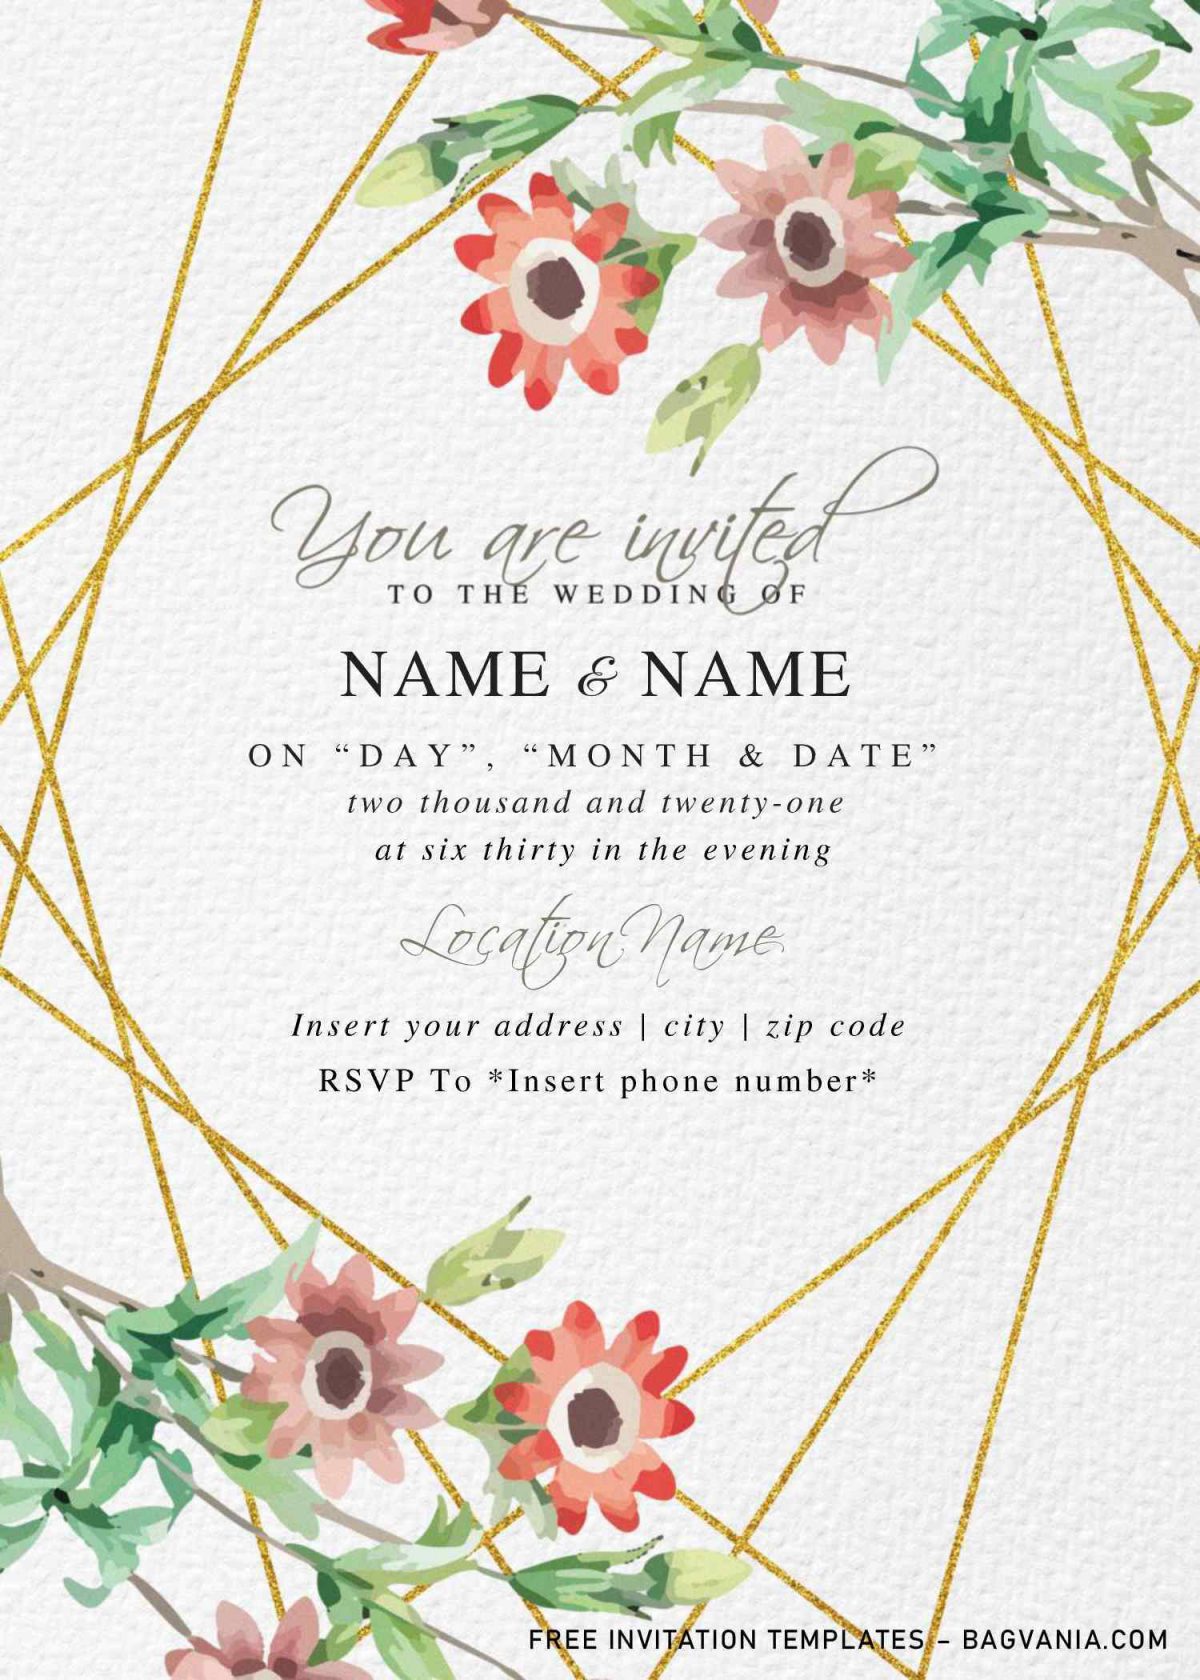 Free Botanical Floral Wedding Invitation Templates For Word and has gold geometric frame